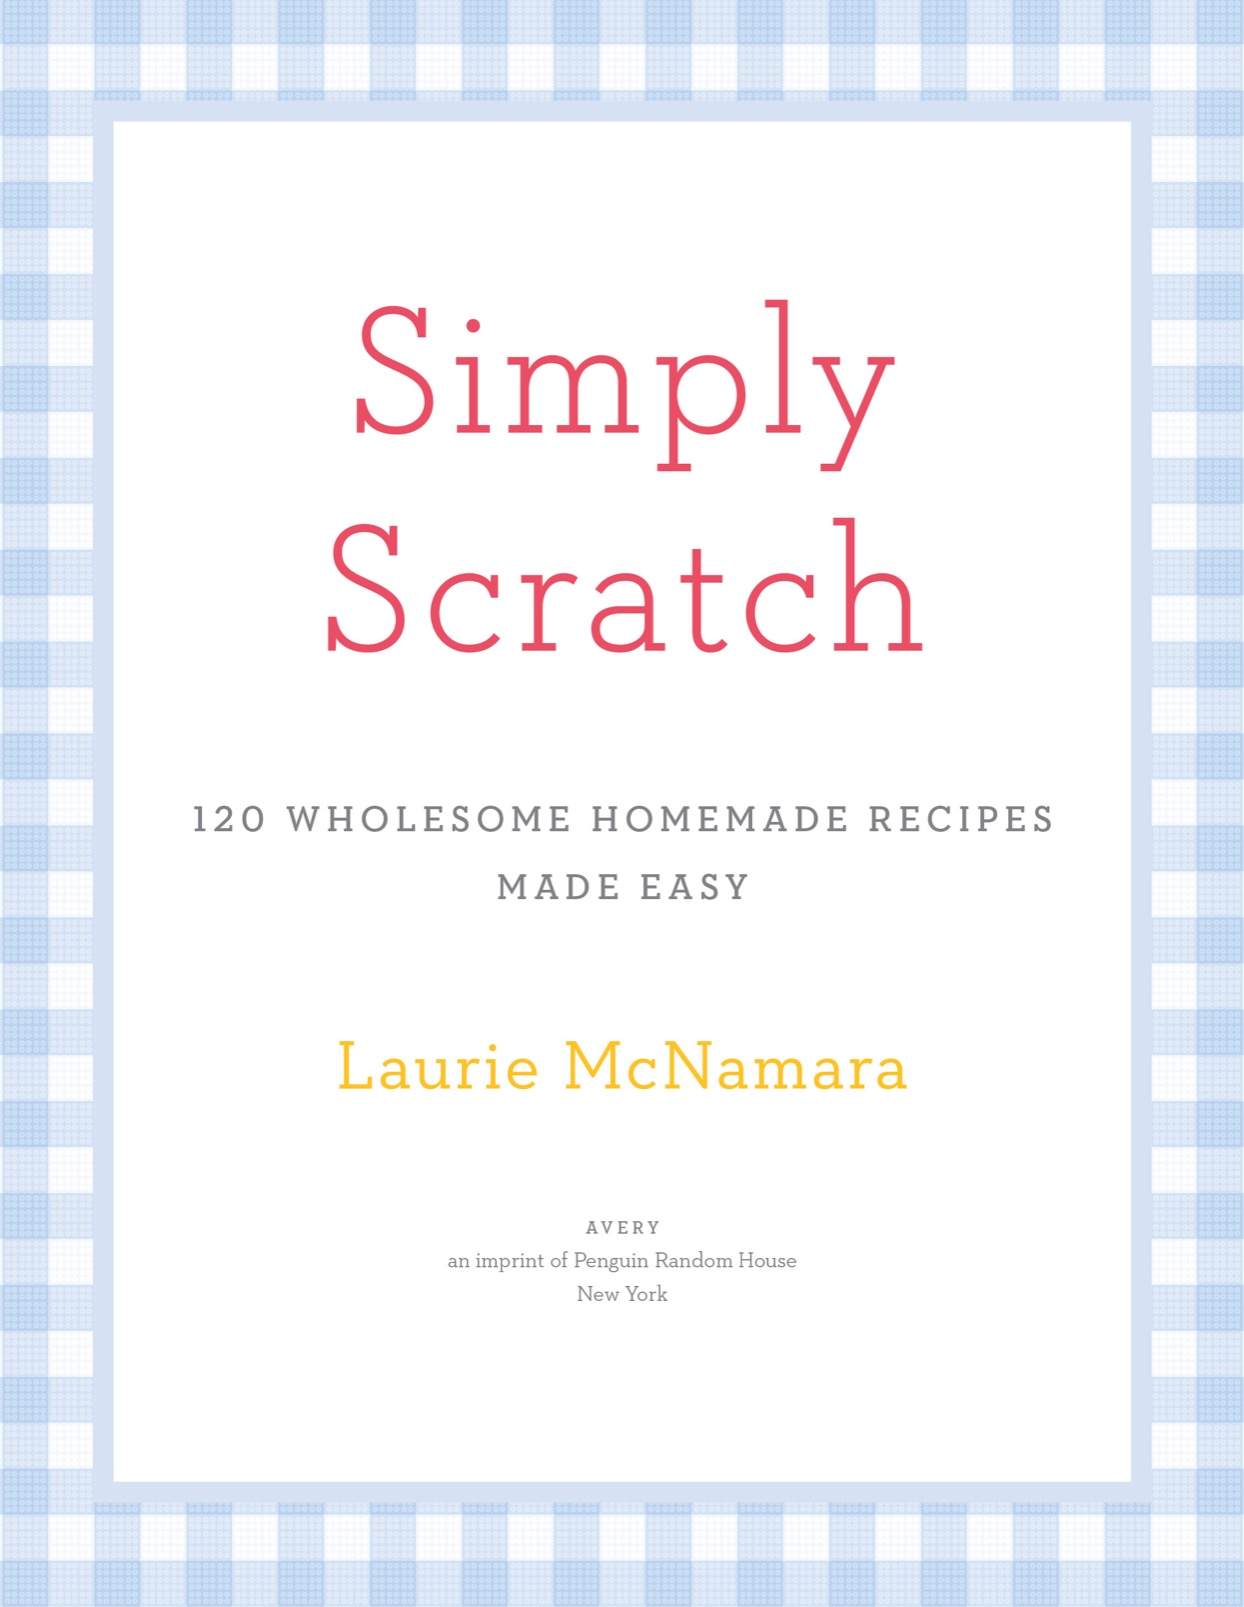 Simply scratch 120 wholesome homemade recipes made easy - image 2